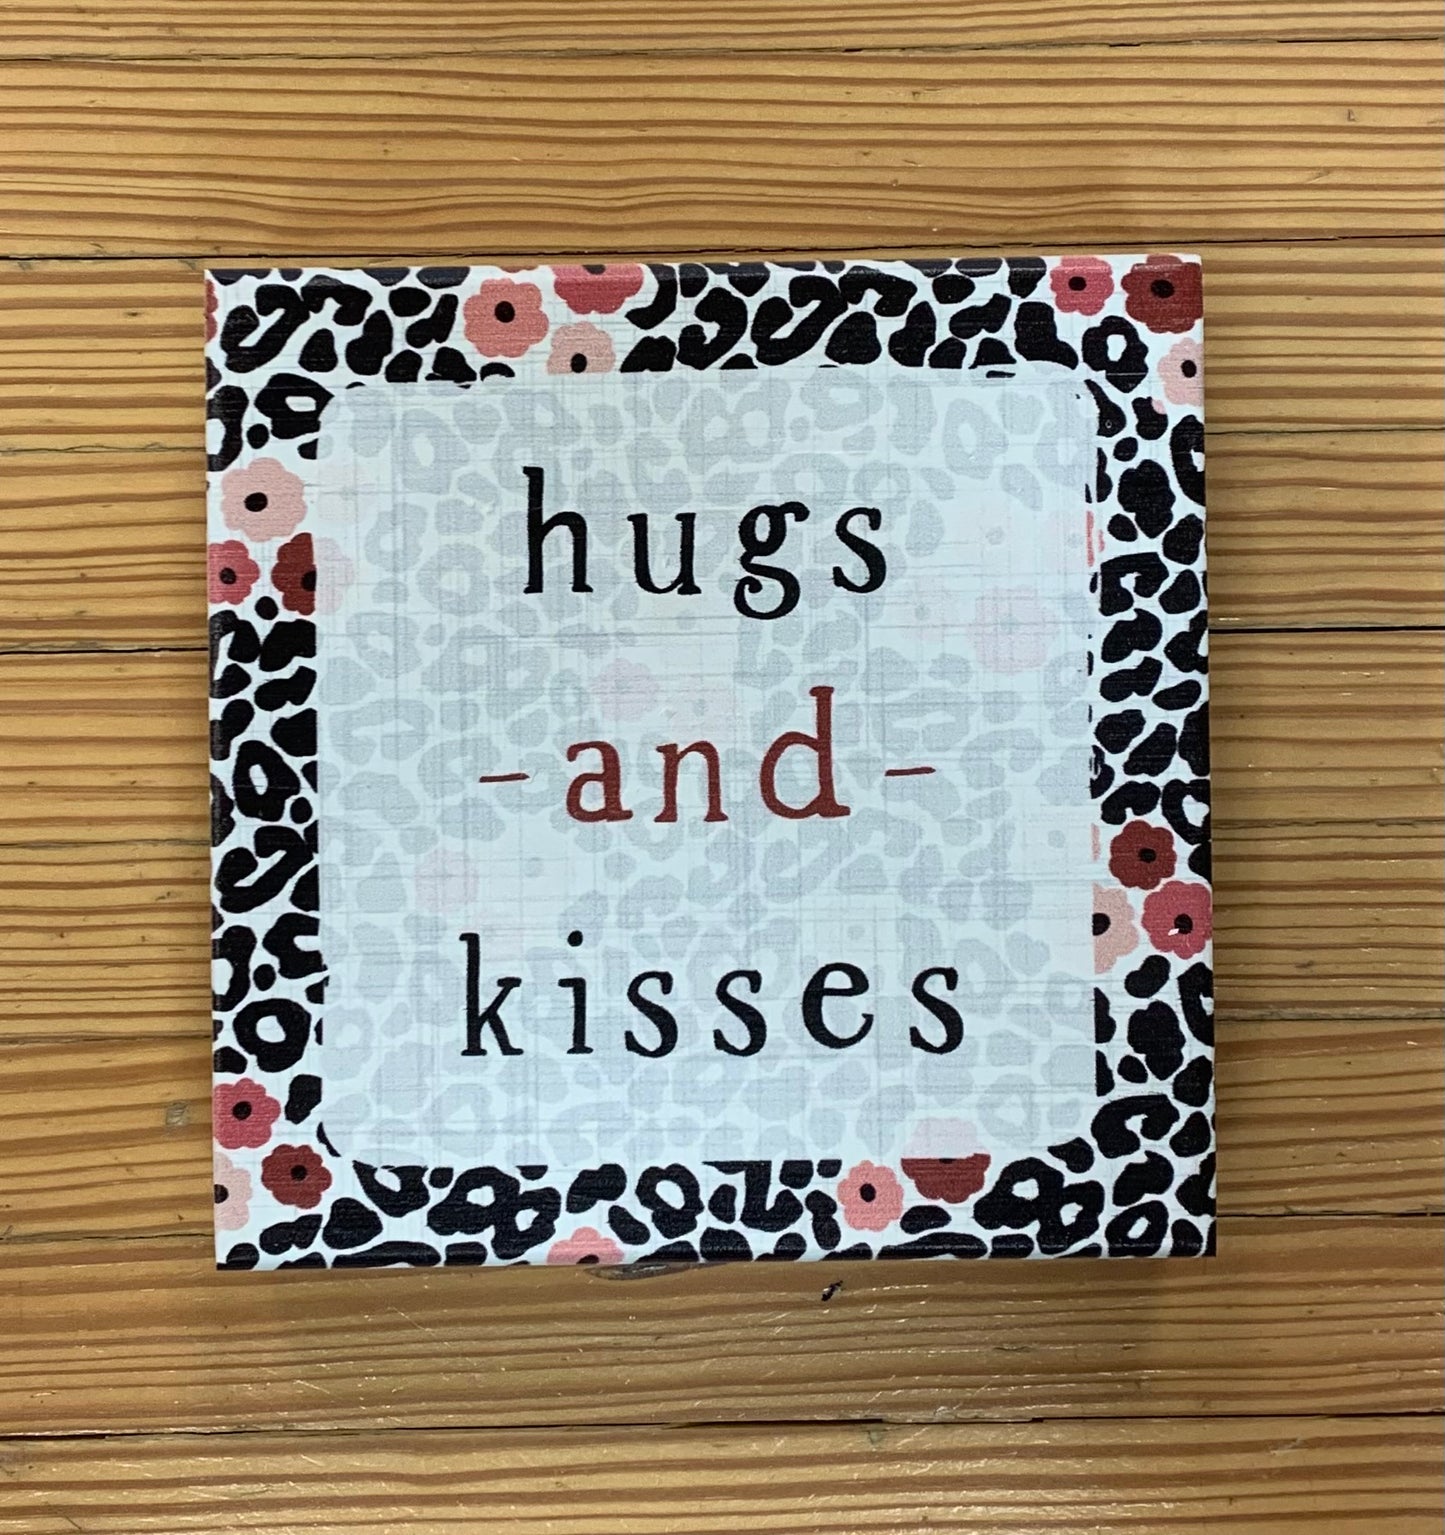 Wooden Block Sign "hugs and kisses"